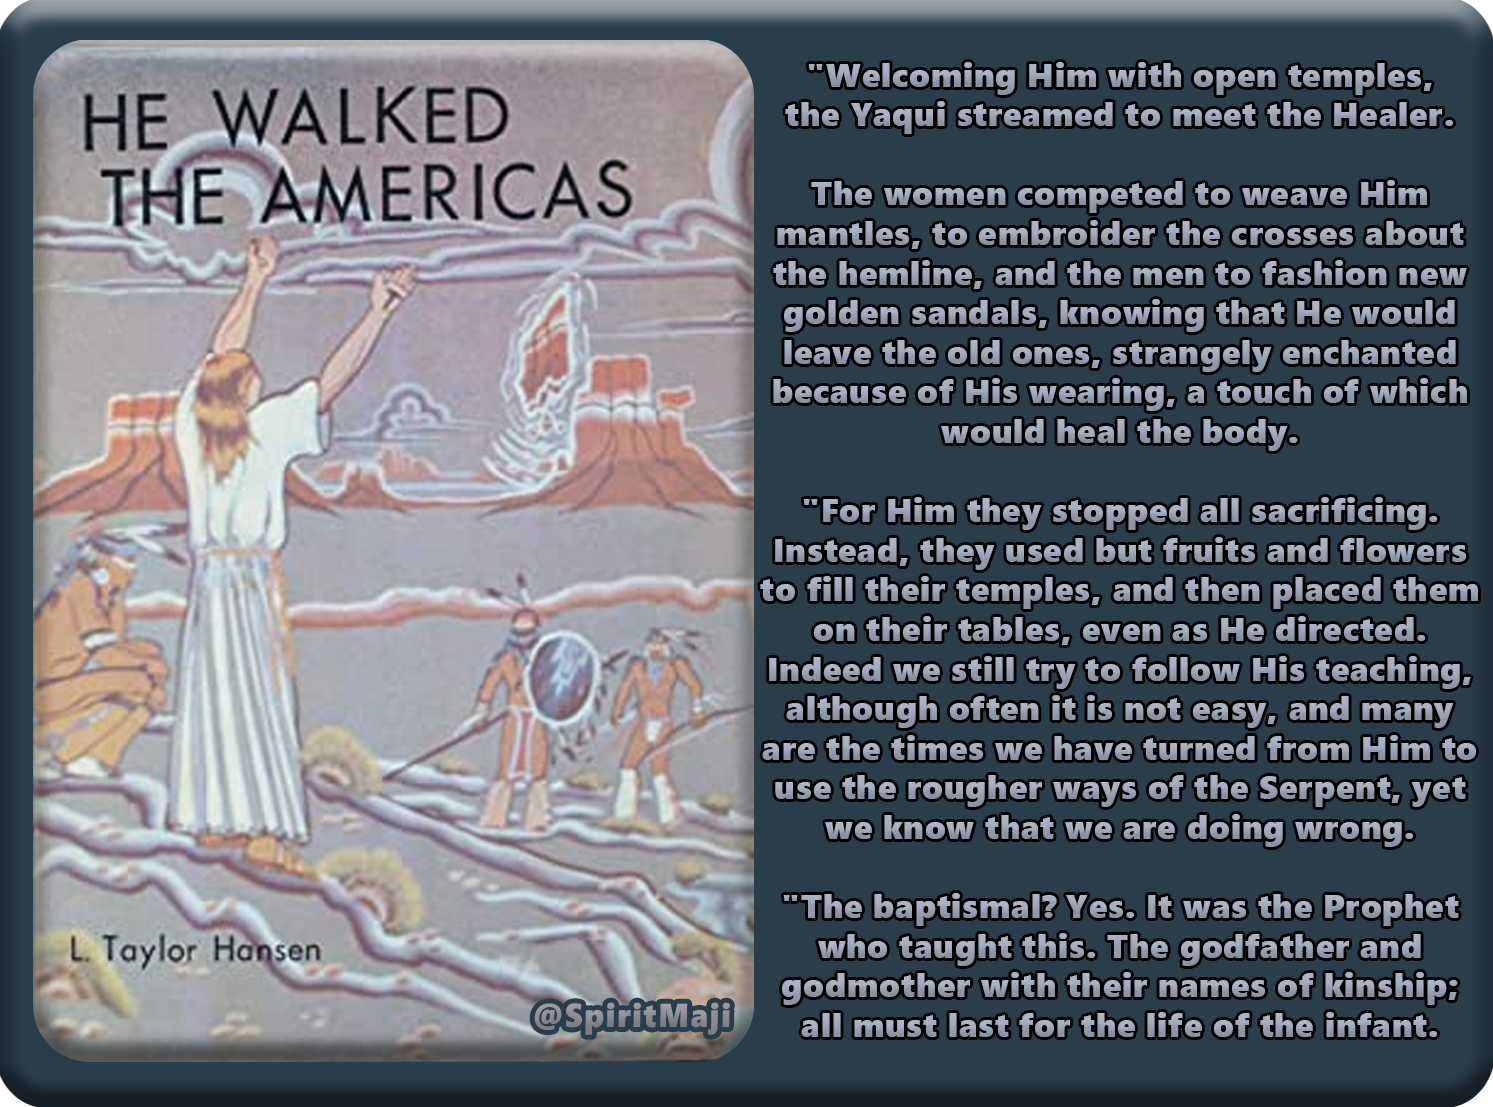 He walked the americas temples stop sacrificing ways of the serpent